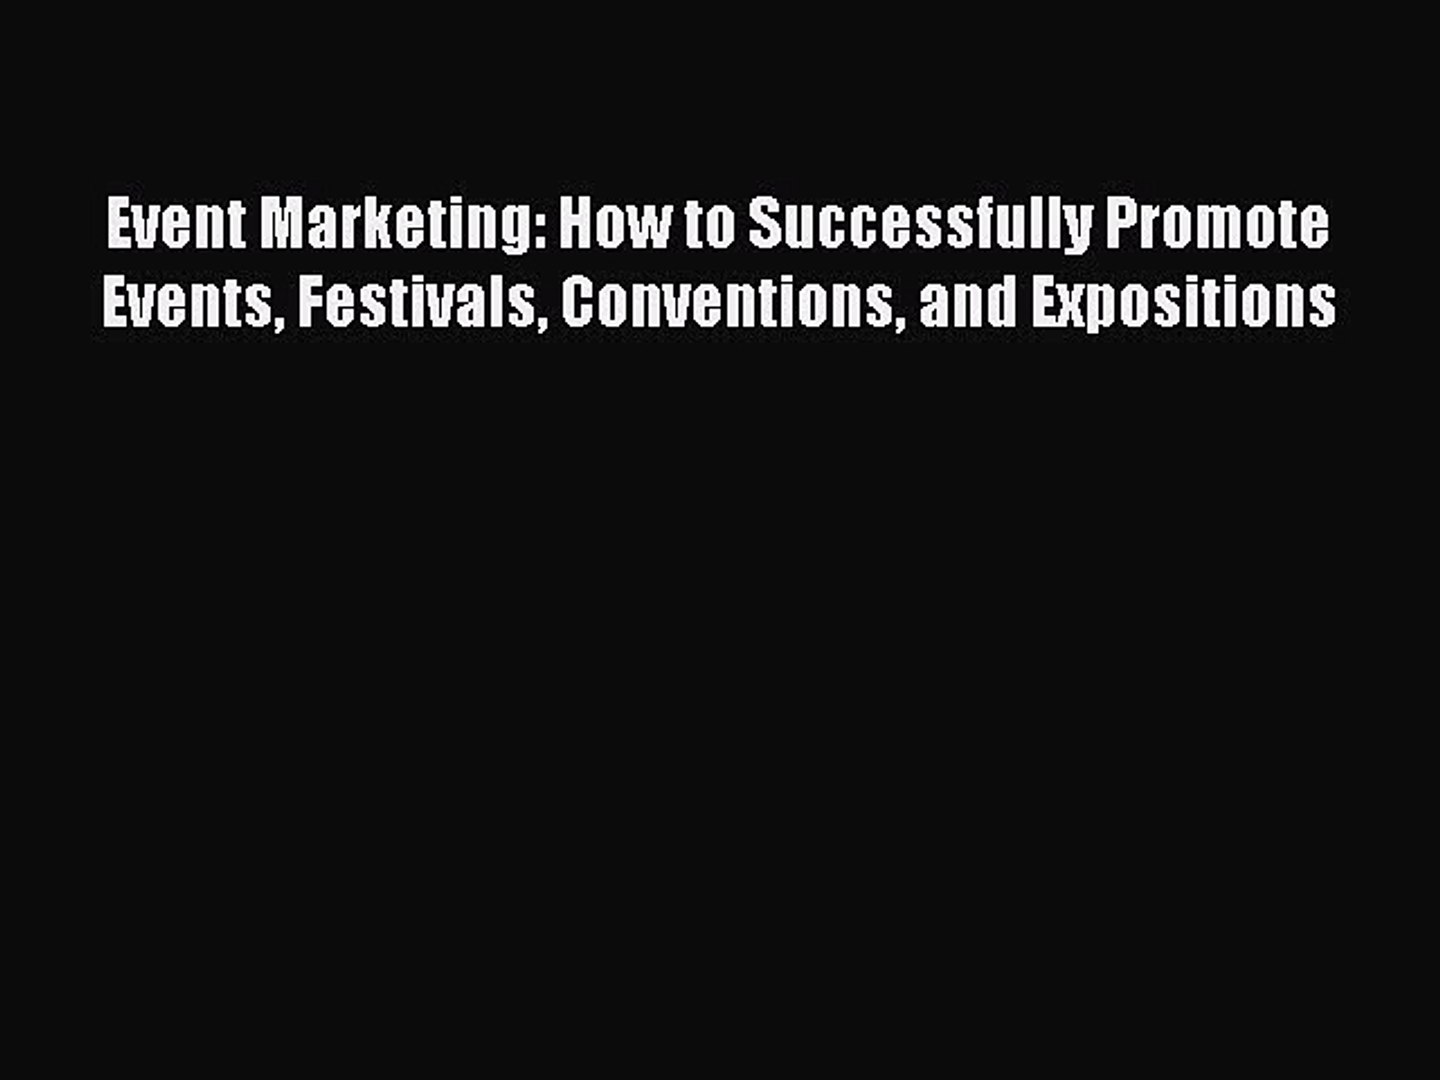 PDF Event Marketing: How to Successfully Promote Events Festivals Conventions and Expositions